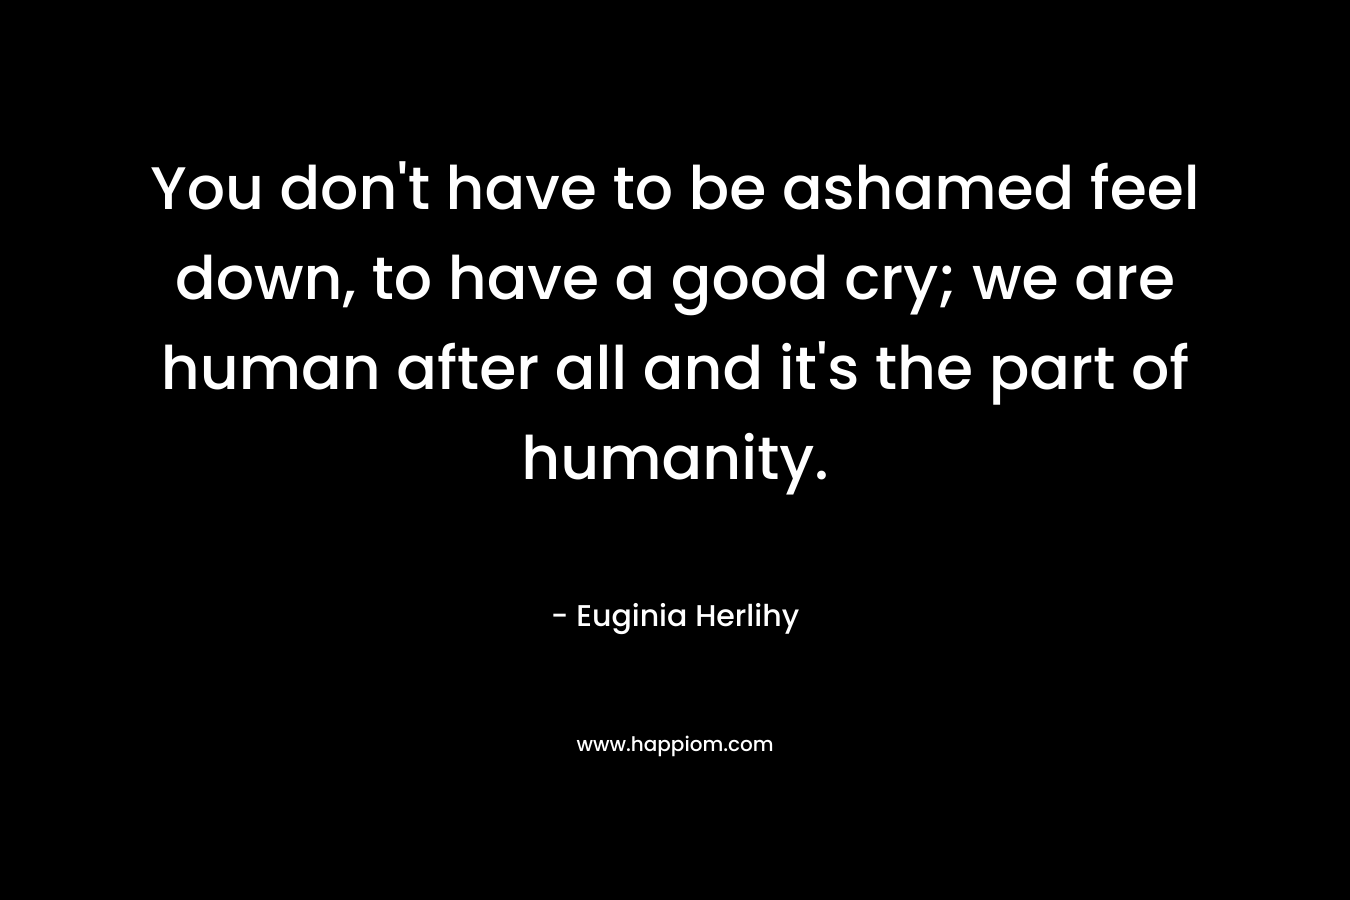 You don't have to be ashamed feel down, to have a good cry; we are human after all and it's the part of humanity.